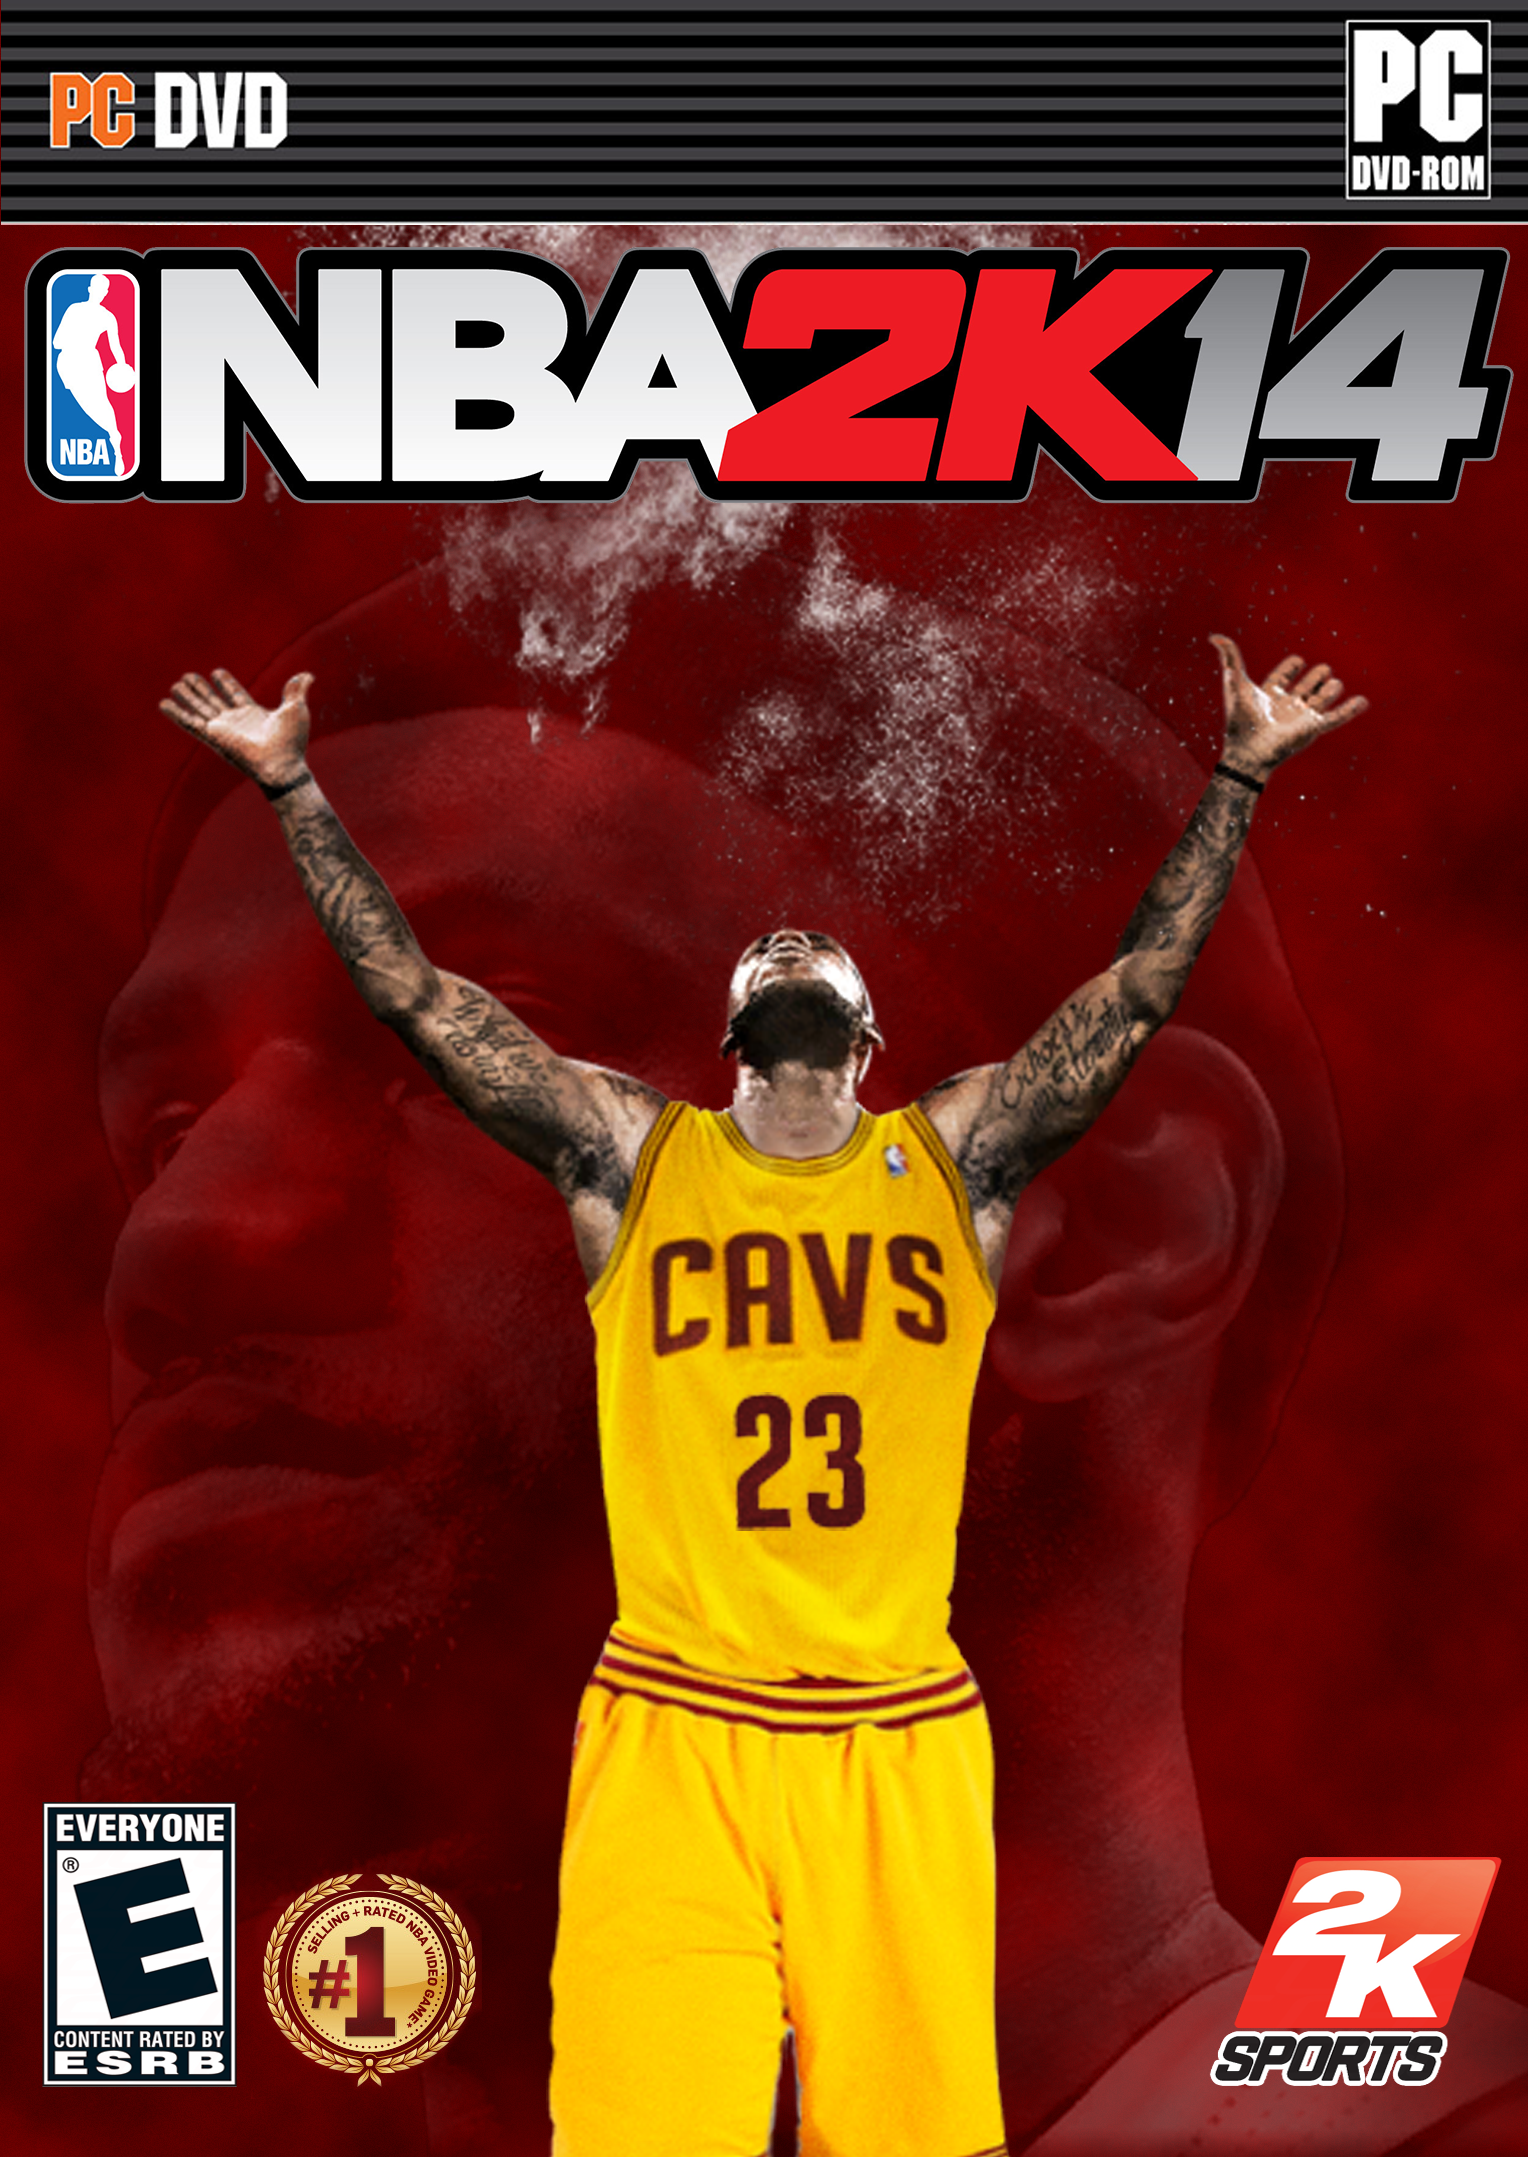 NBA 2K15 Custom Covers - Page 7 - Operation Sports Forums